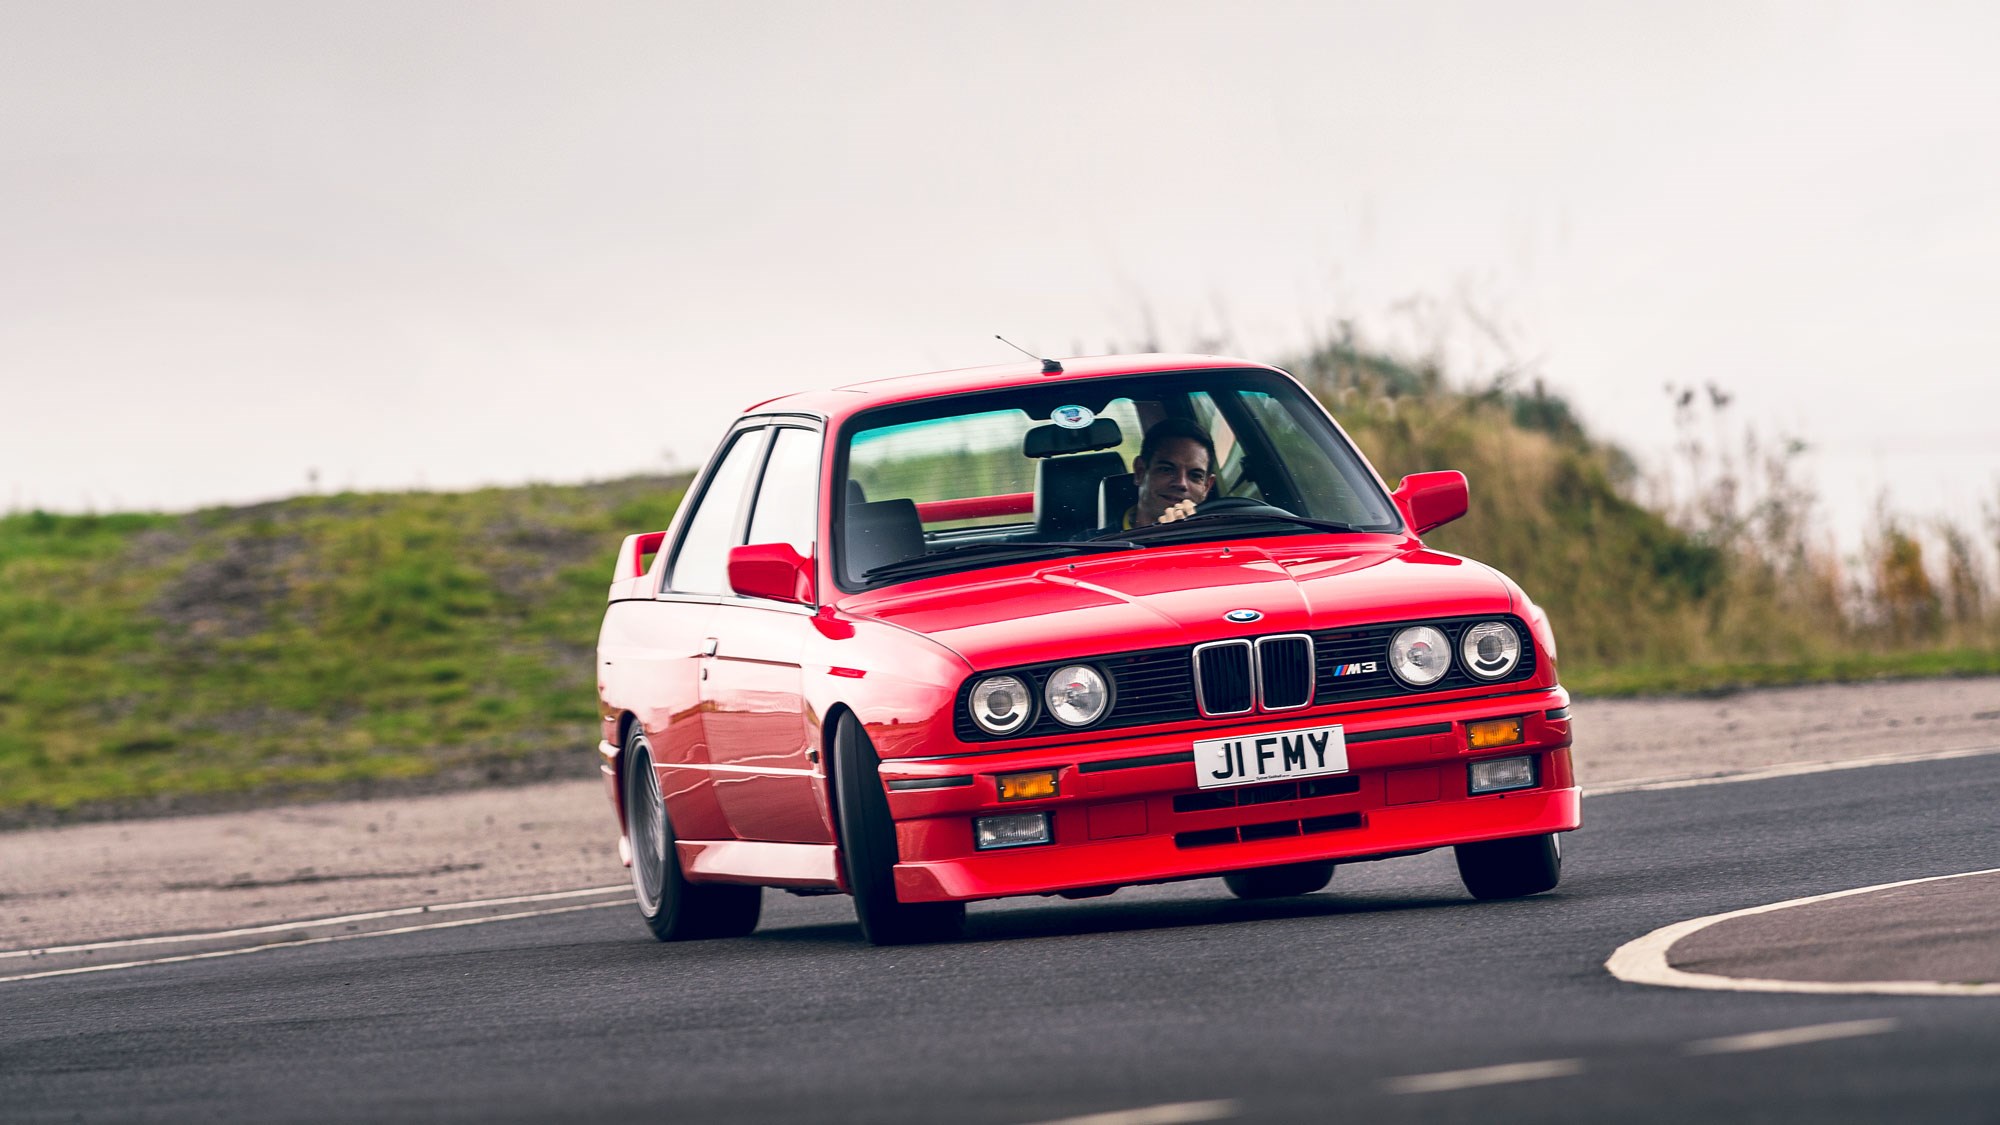 The BMW E30 M3 buying guide - The essence of an M car